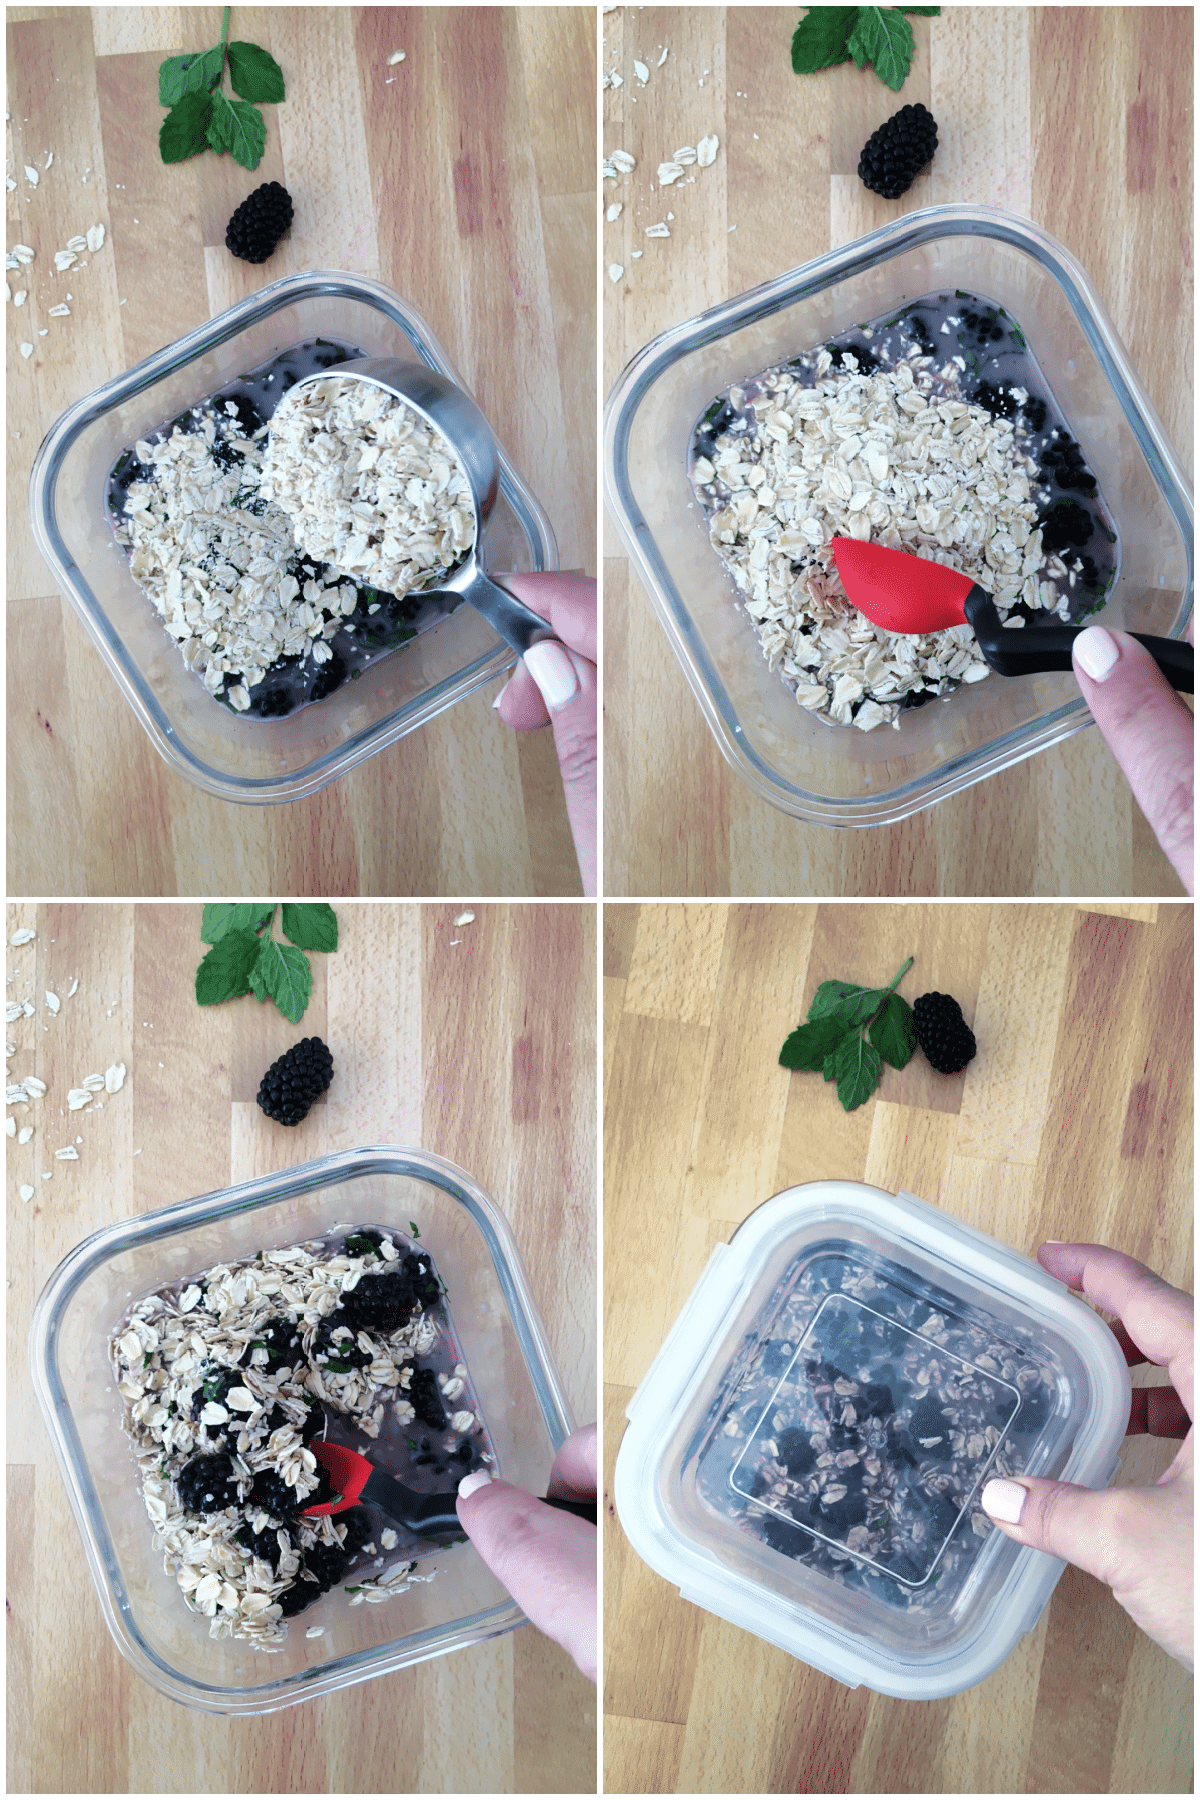 4 images showing how to make overnight oats: add berries, milk, and oats to a glass container, stir to combine, cover with lid